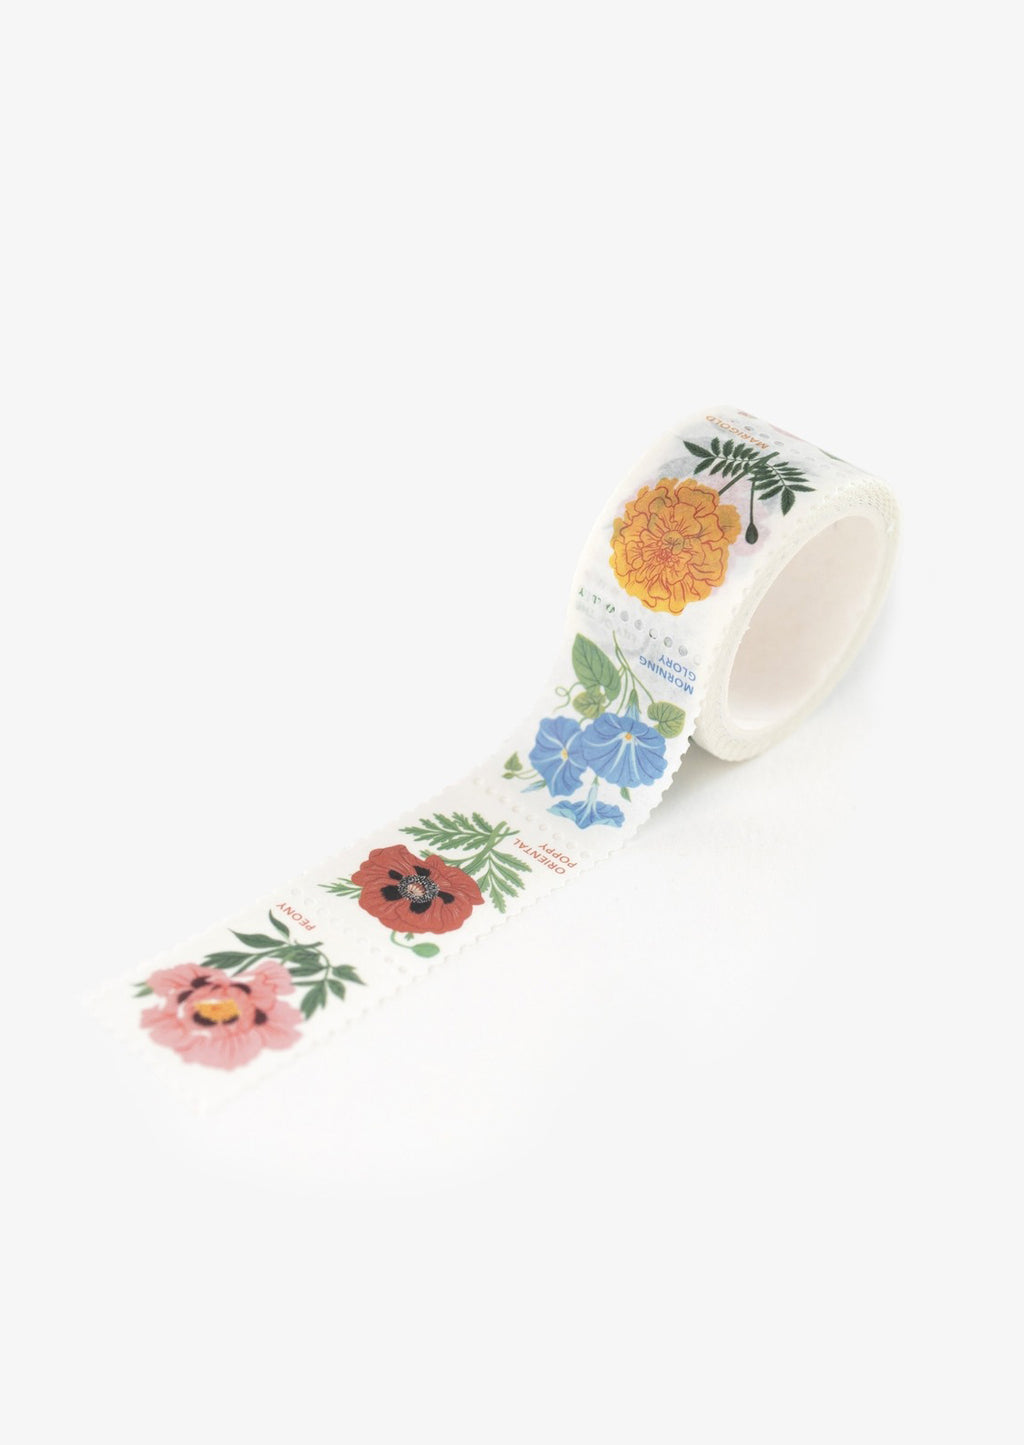 2: Floral stamp washi tape with perforated design.